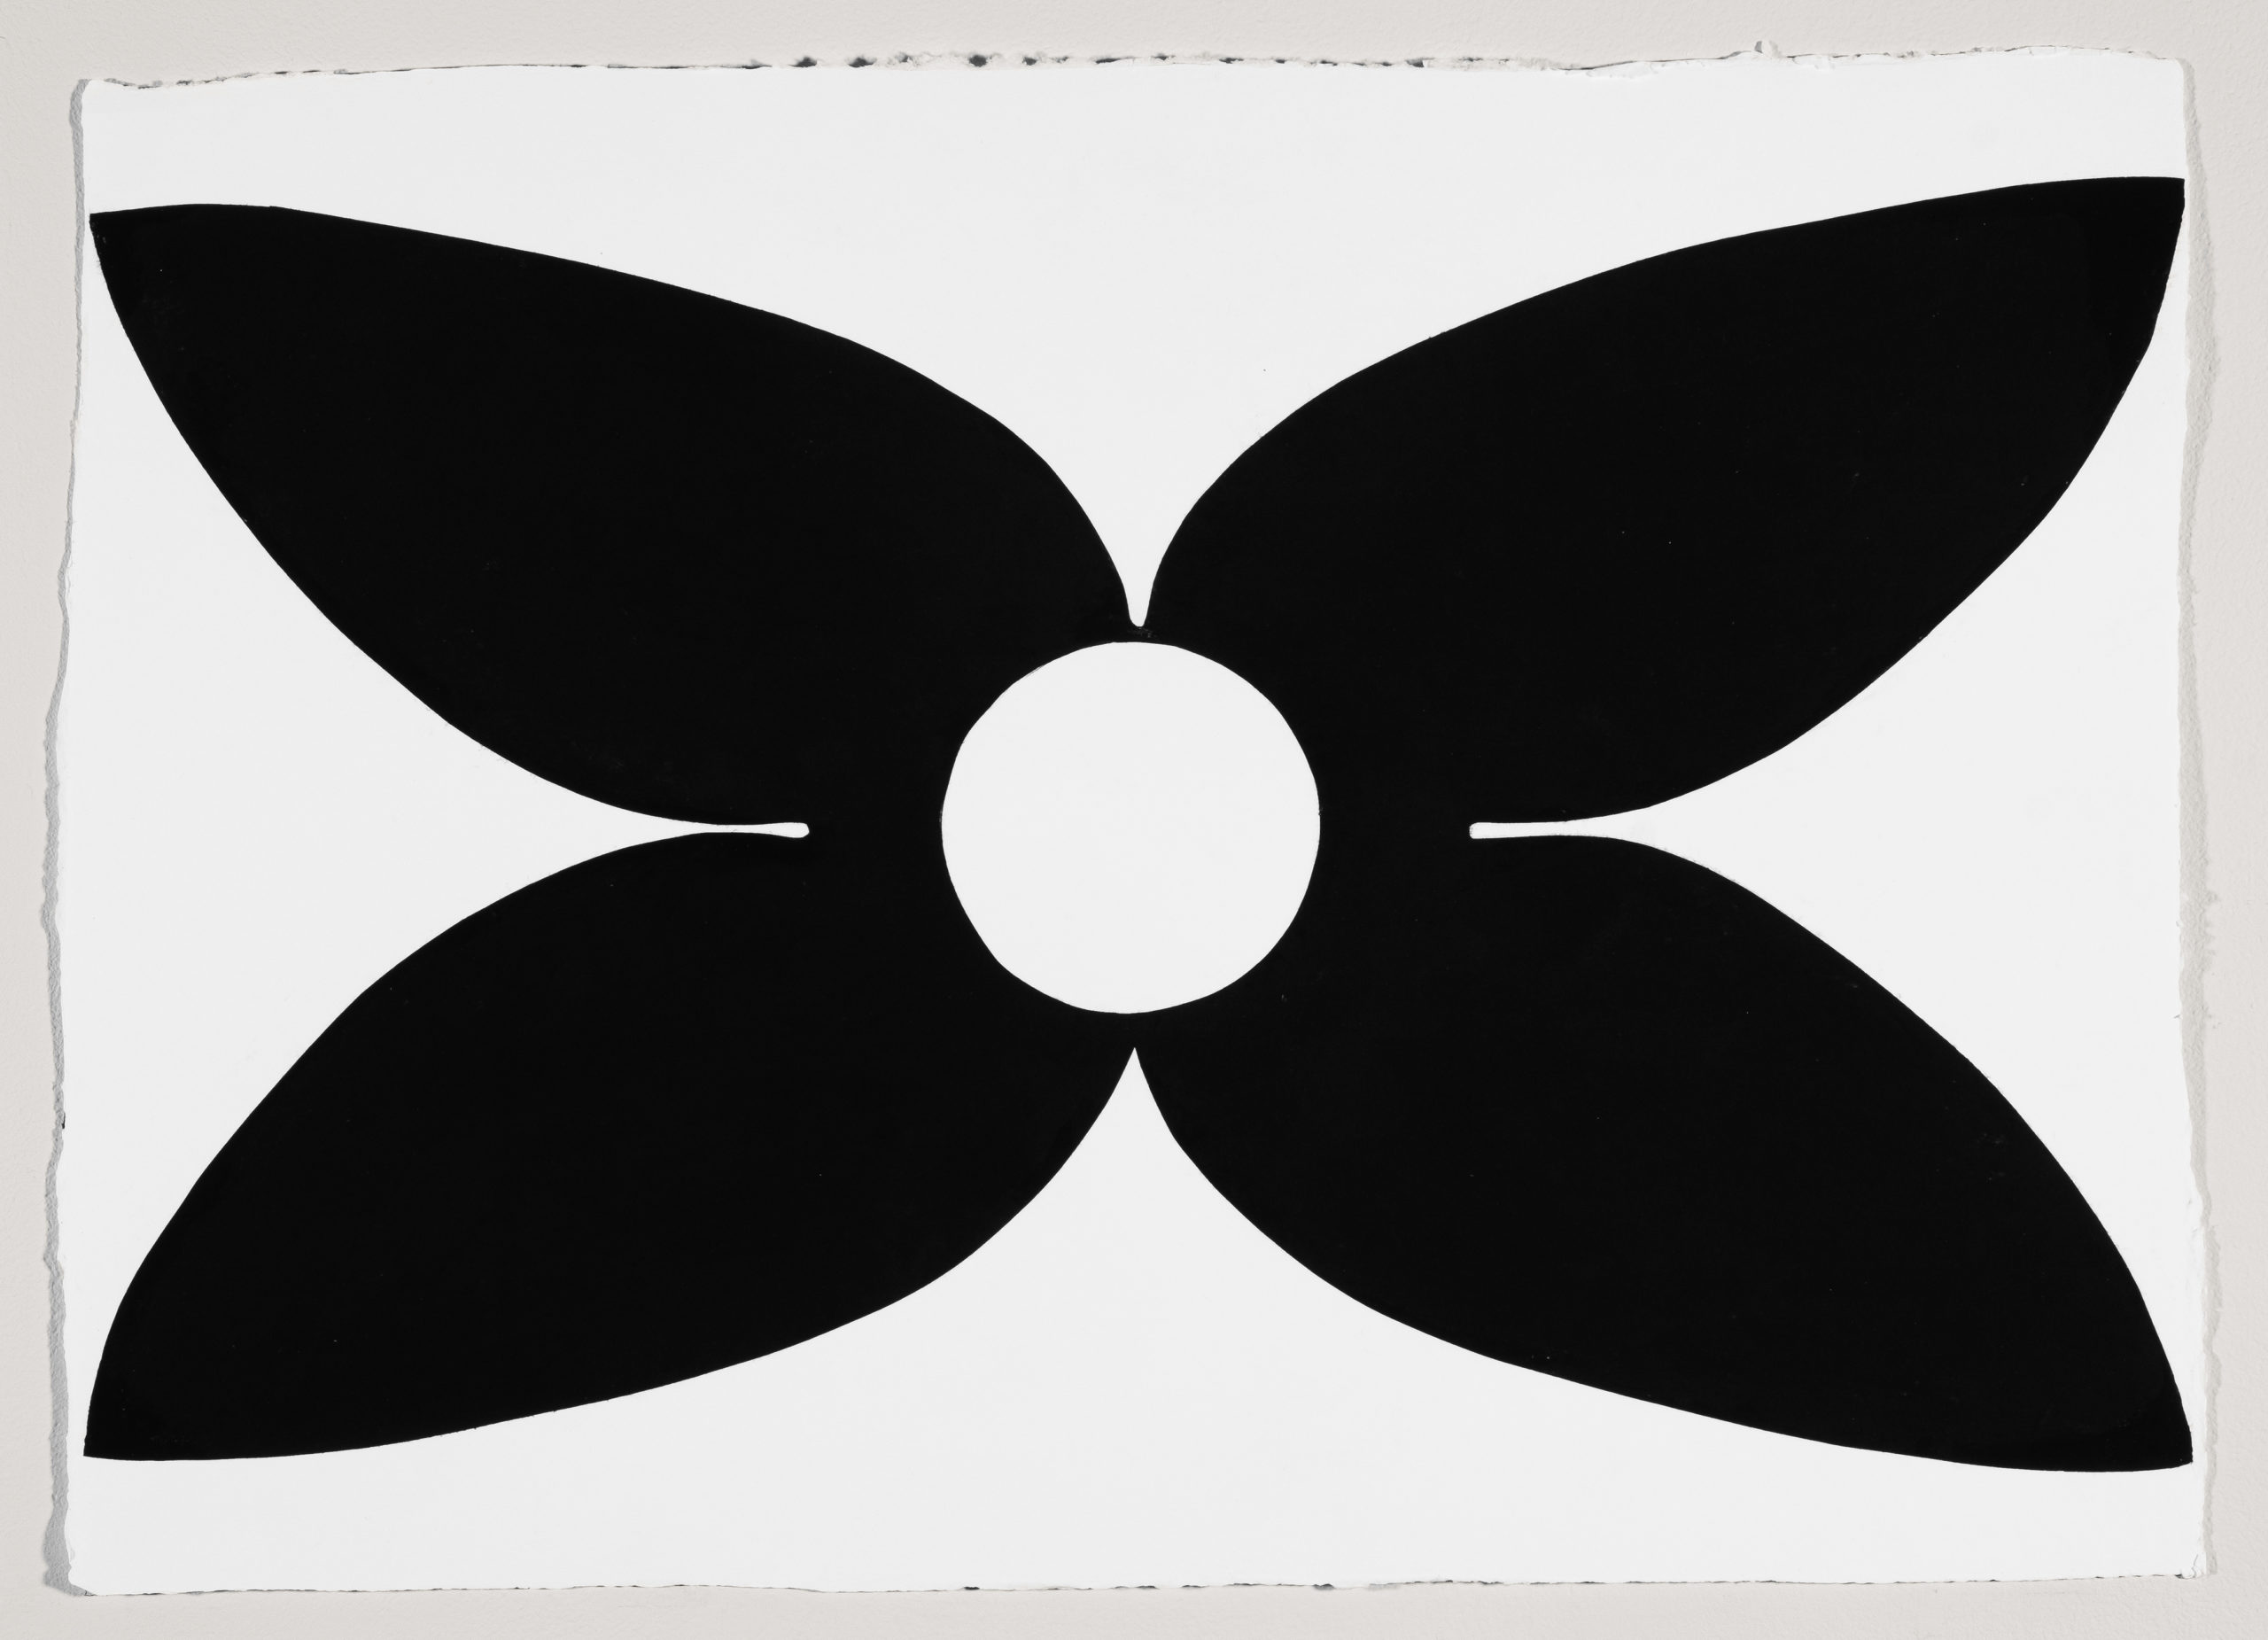 Claire Lieberman: "Big Butterfly", 2022. Cast, handmade paper, edition of 5. 22" x 30".